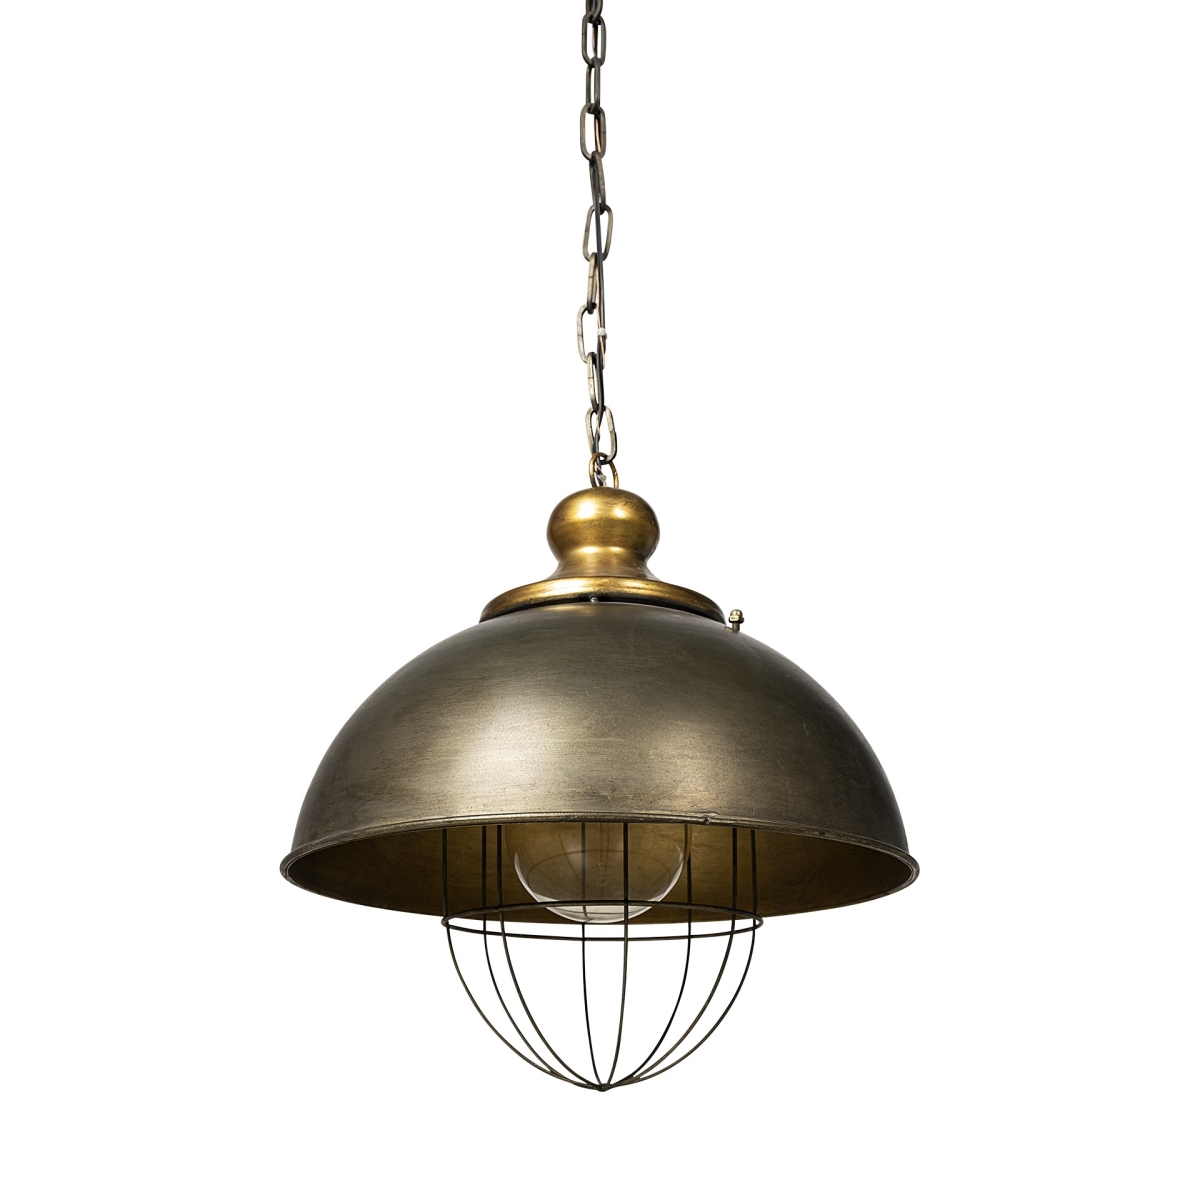 Picture of HomeRoots 392836 17 x 16.25 x 16.25 in. Rustic Gold Ton Metal Dome Hanging Light